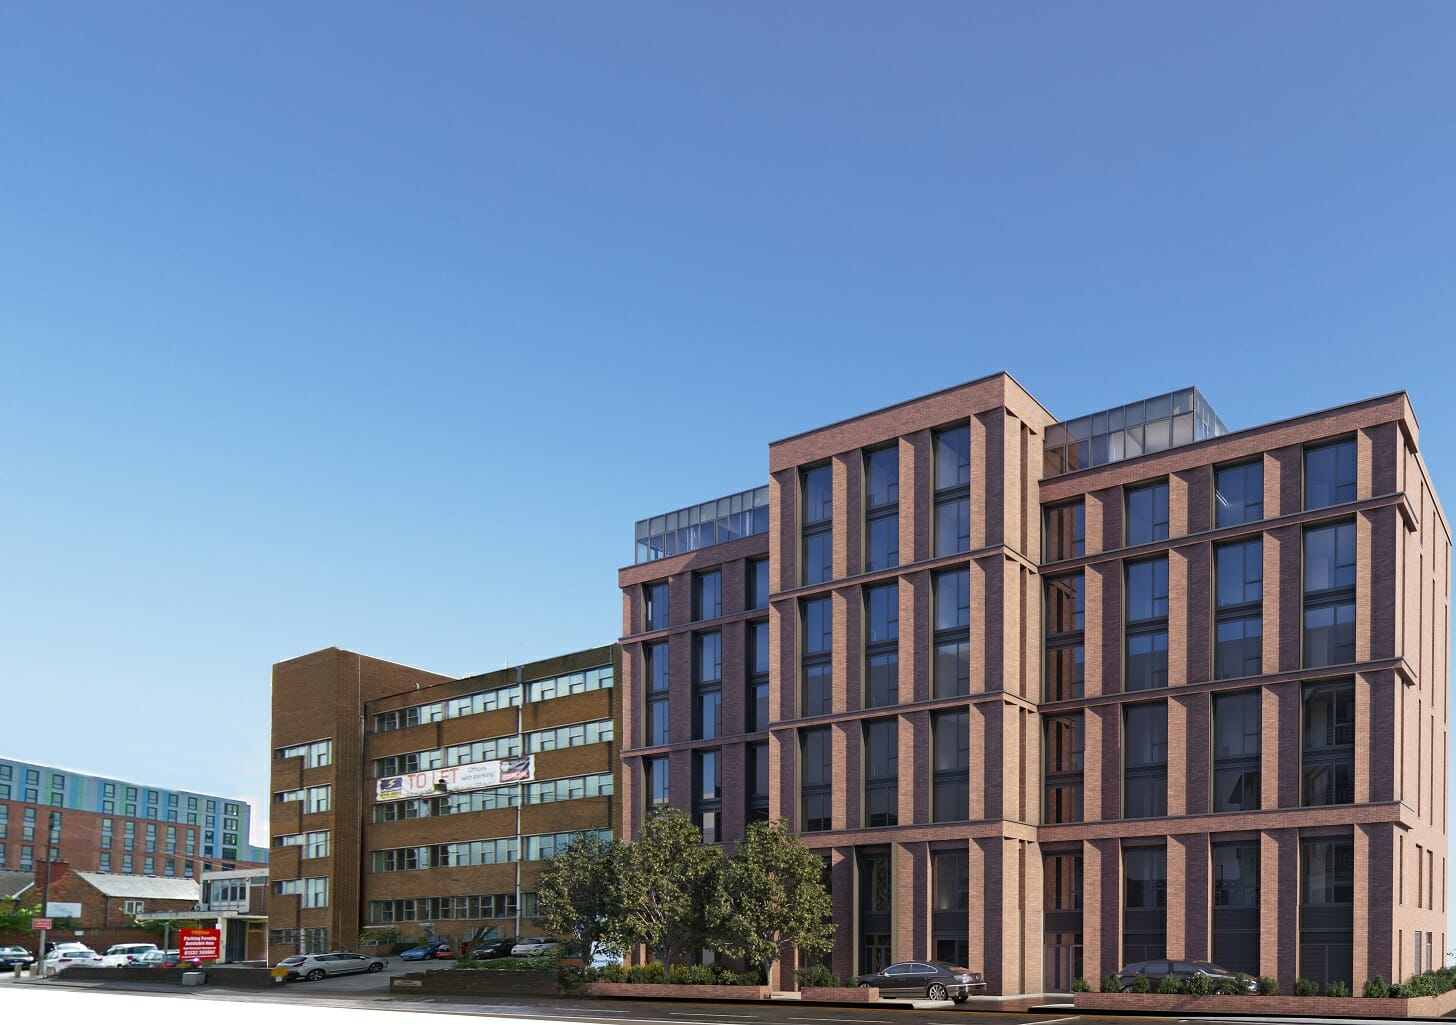 PLANNING APPROVED FOR A NEW DERBY STUDENT ACCOMMODATION